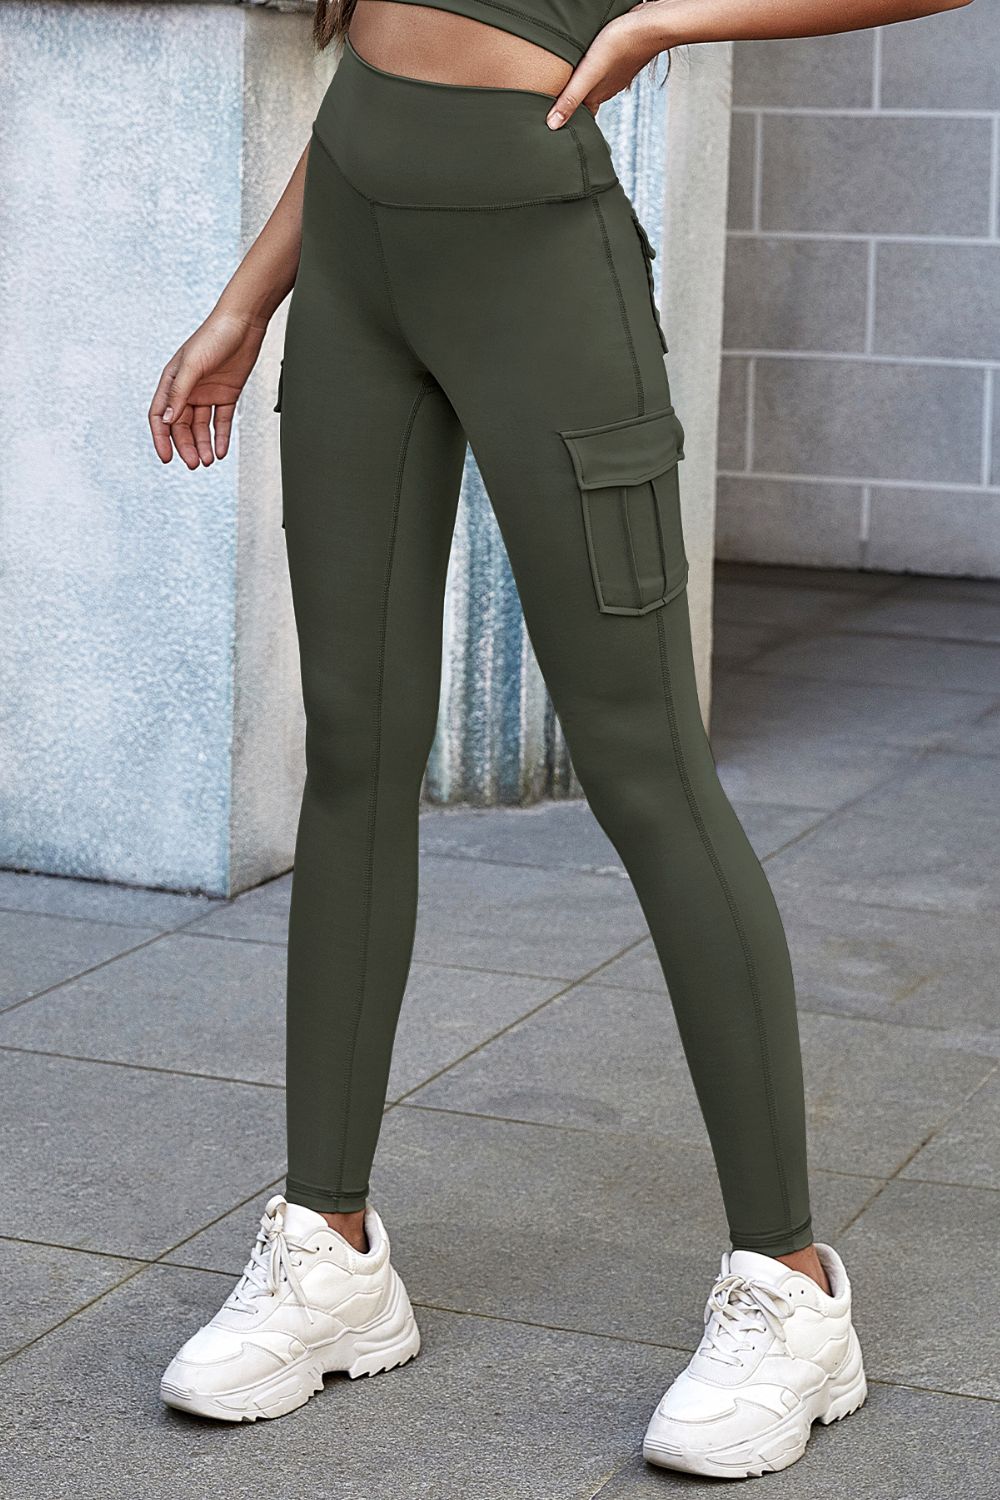 High Waist Leggings with Pockets - Green / S - Women’s Clothing & Accessories - Pants - 1 - 2024